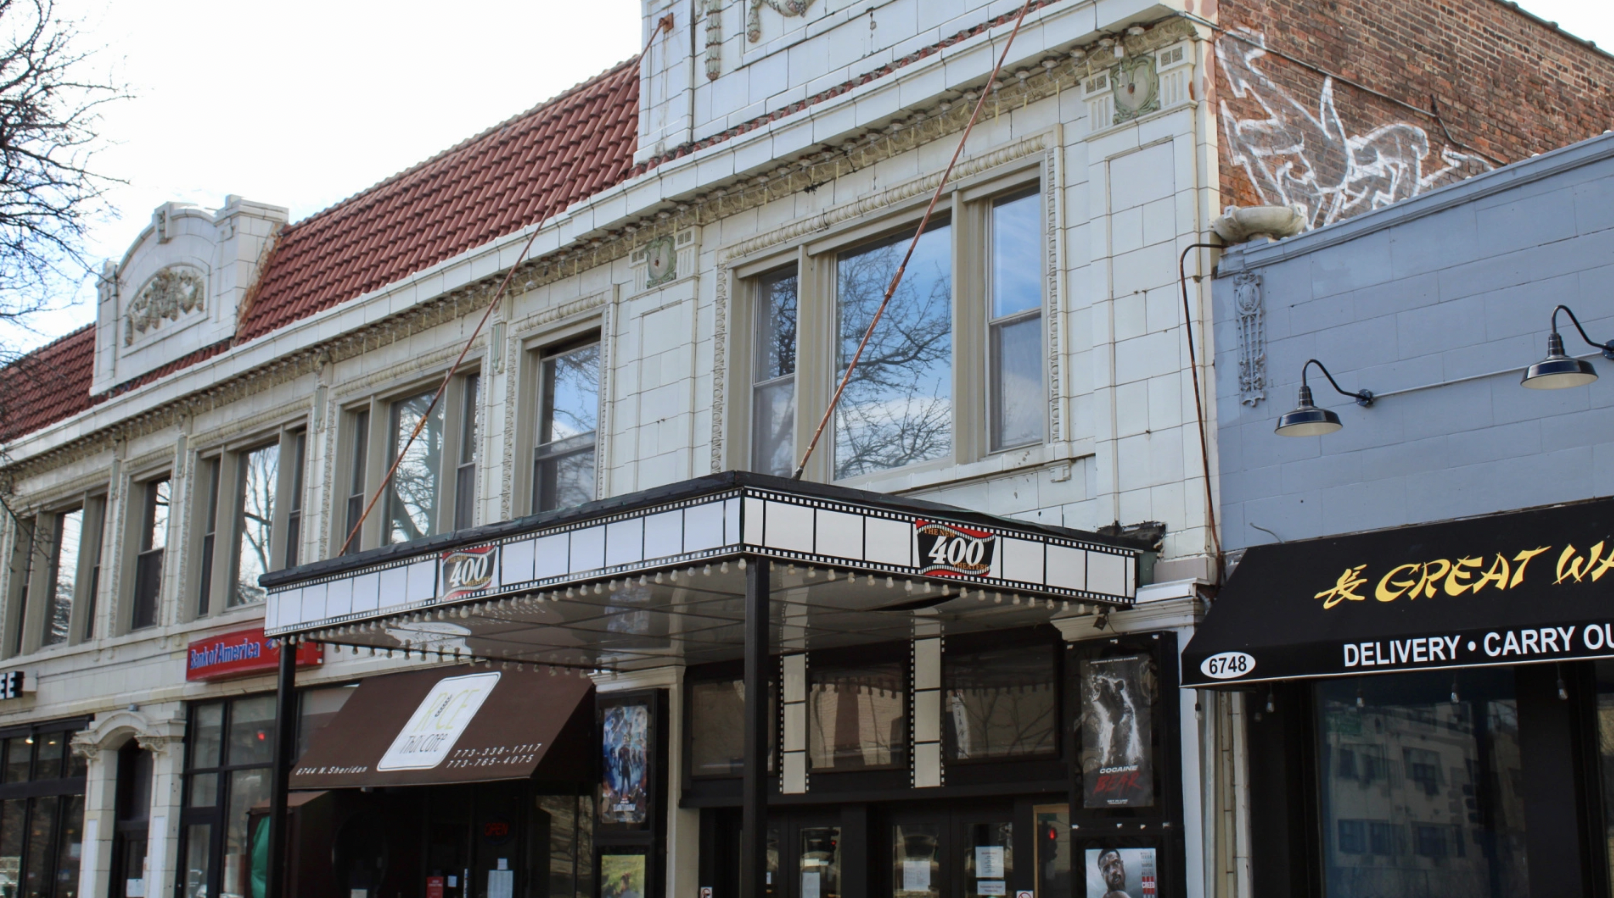 New 400 Theaters Closes After 111-Year Reign In Rogers Park